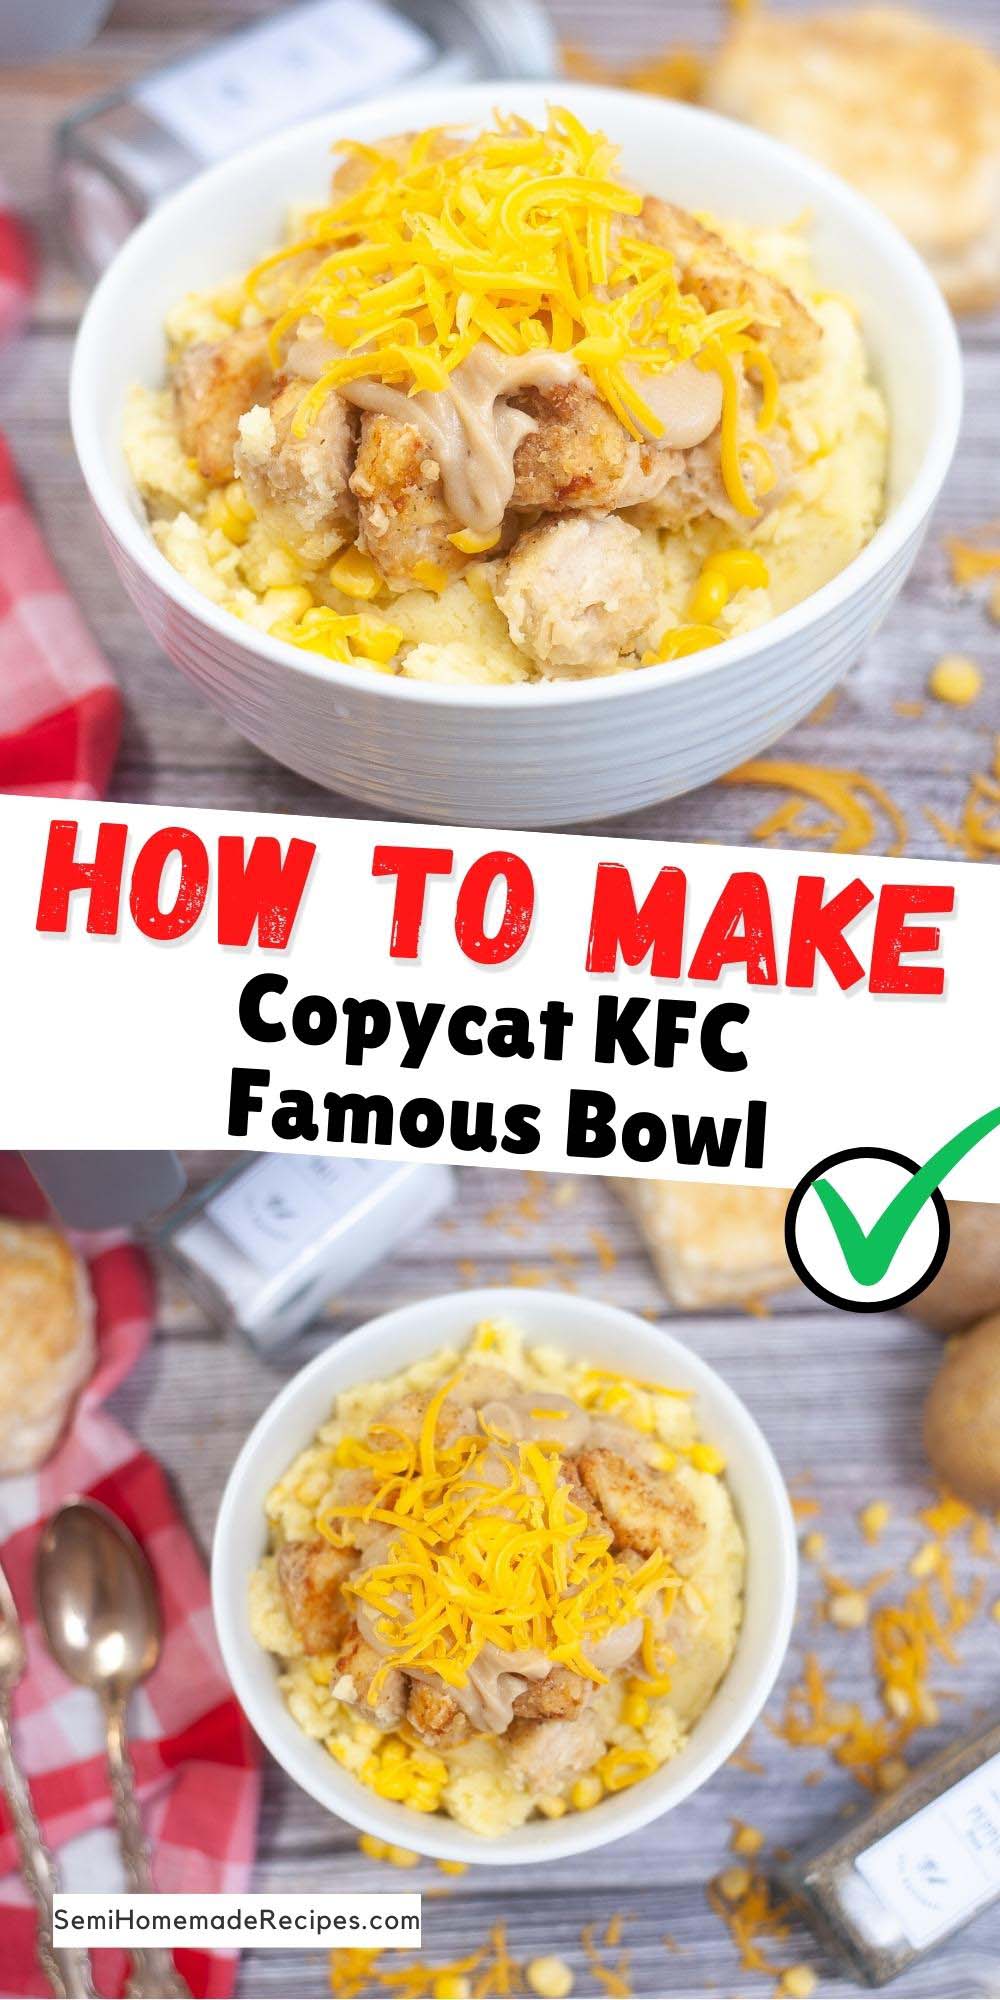 This Chicken Mashed Potato bowl is a semihomemade Copycat KFC Famous Bowl recipe! We've got layers of mashed potatoes, fried chicken, corn, gravy and cheese! No need to run to KFC when we can make this famous bowl at home!